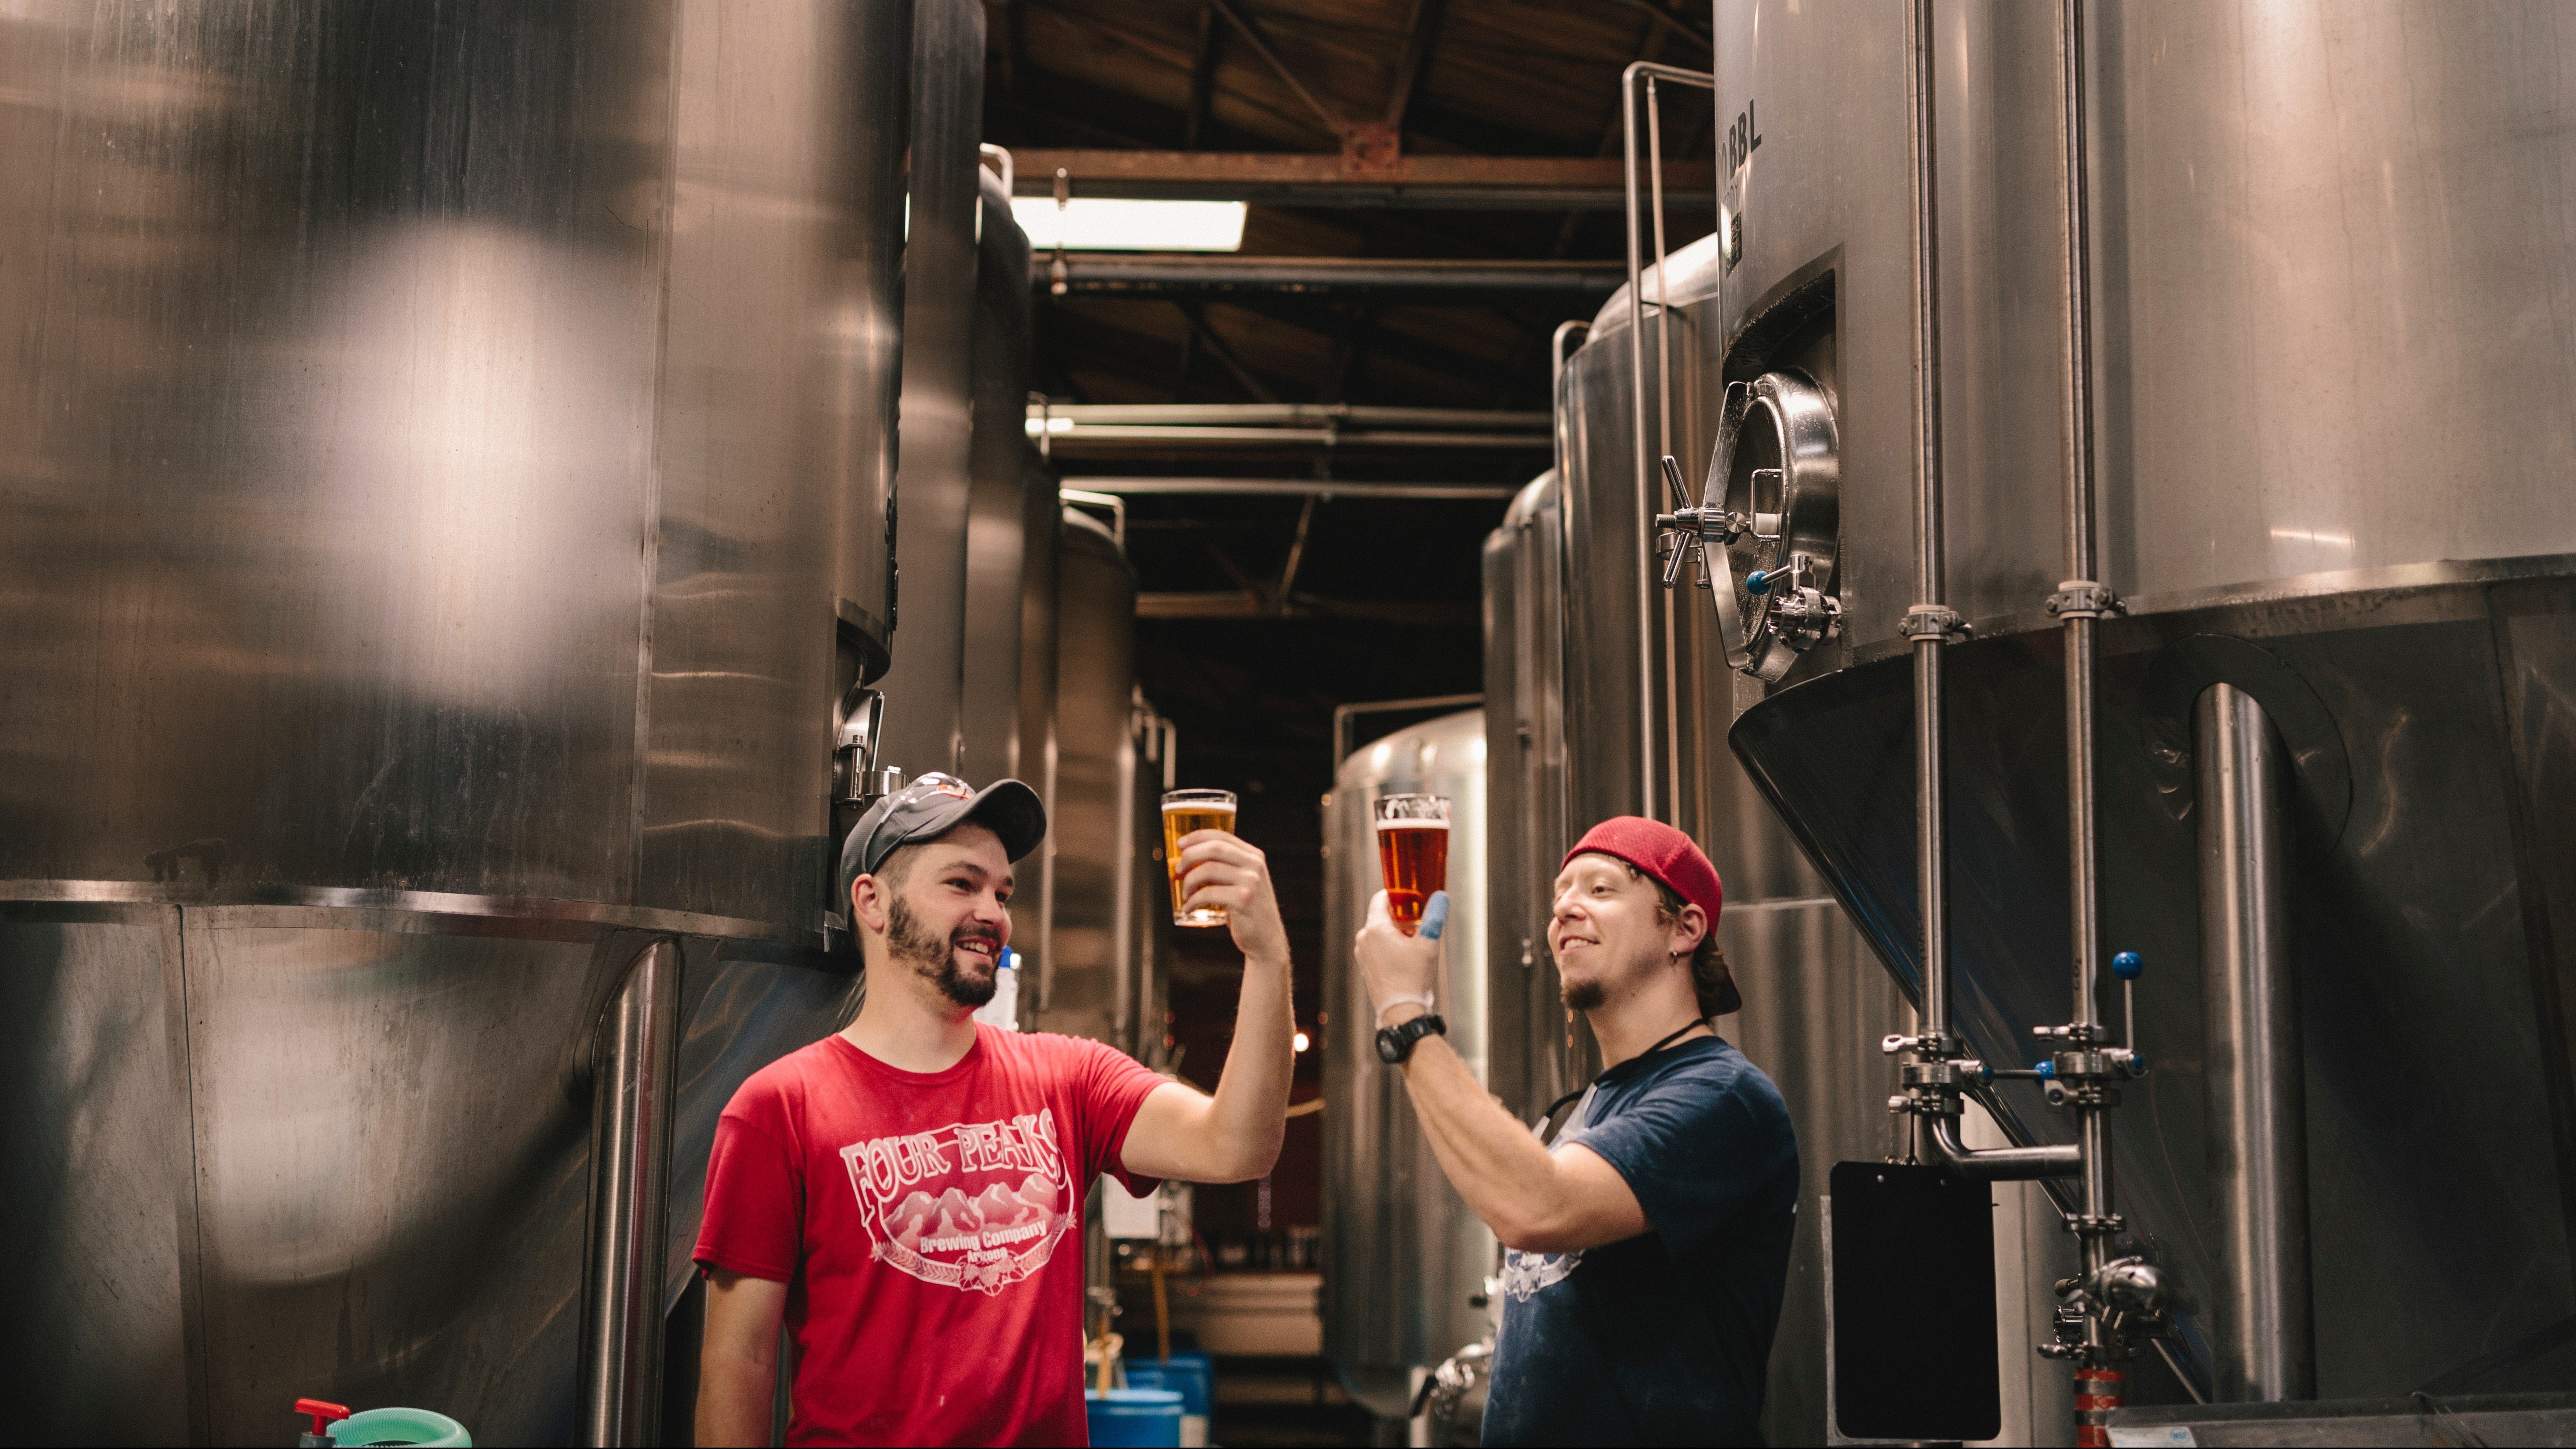 Two brewers analyze their latest beer batches.